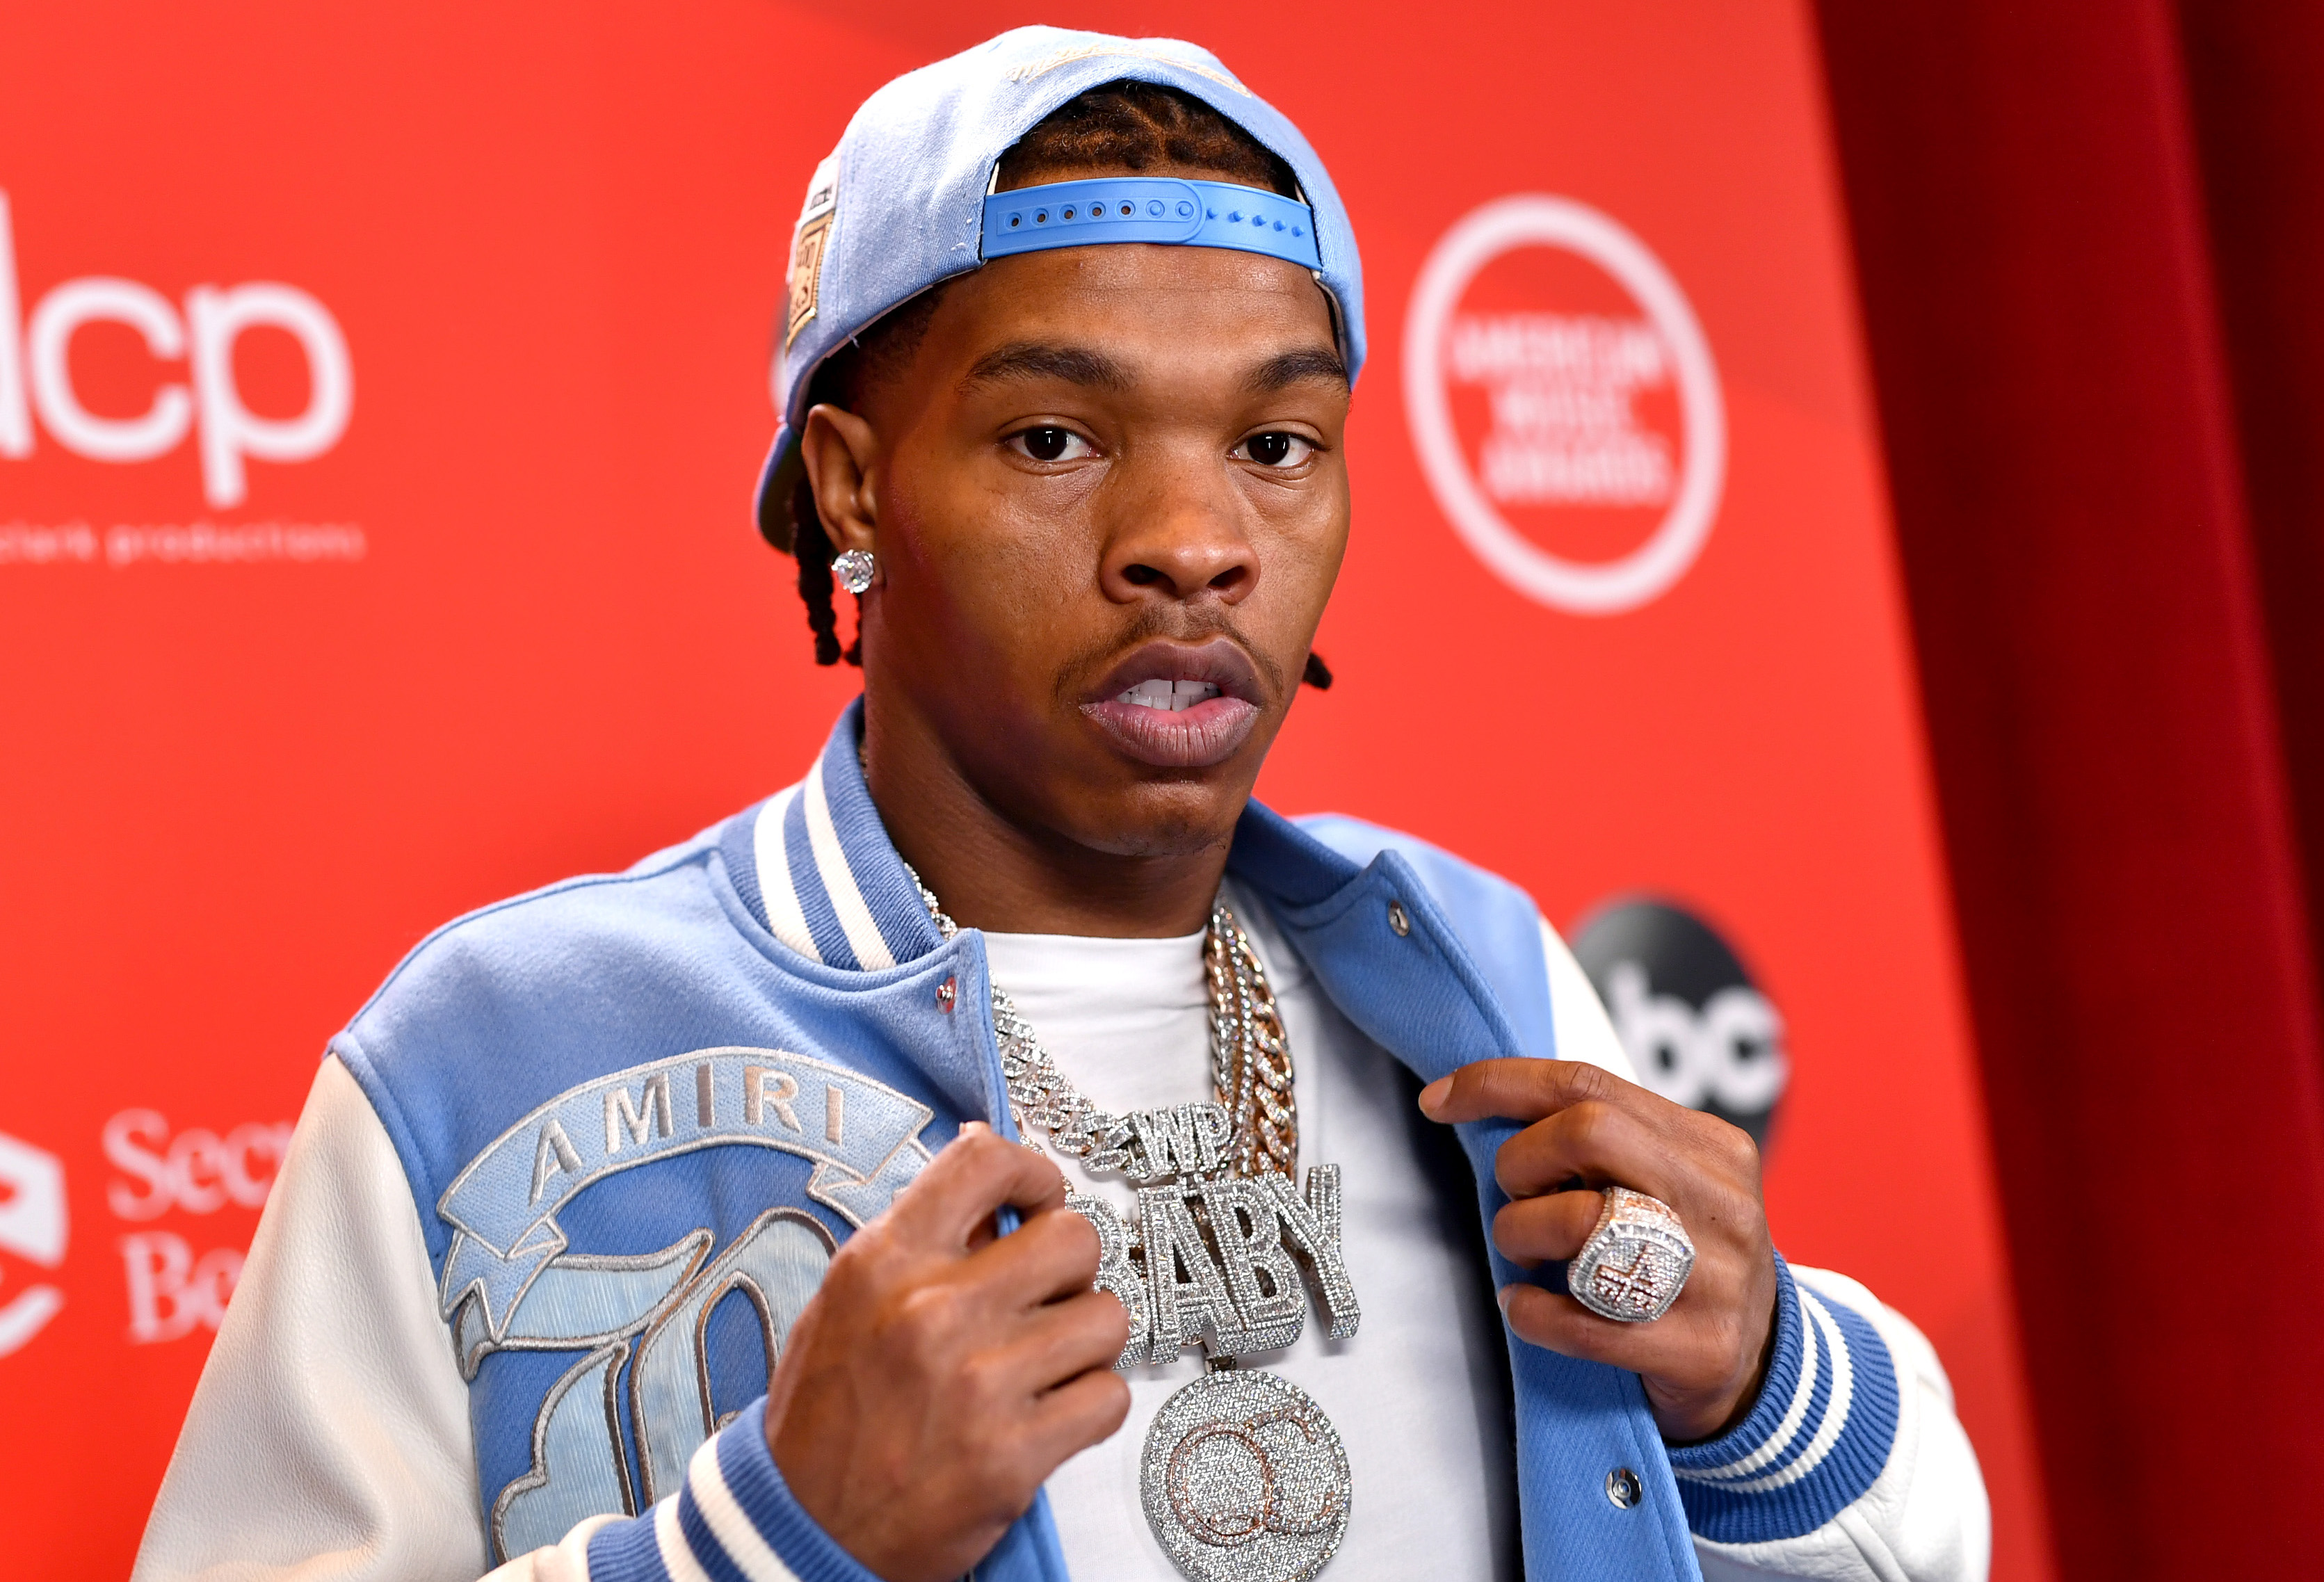 Lil Baby Celebrates His 26th Birthday With Lavish Gifts